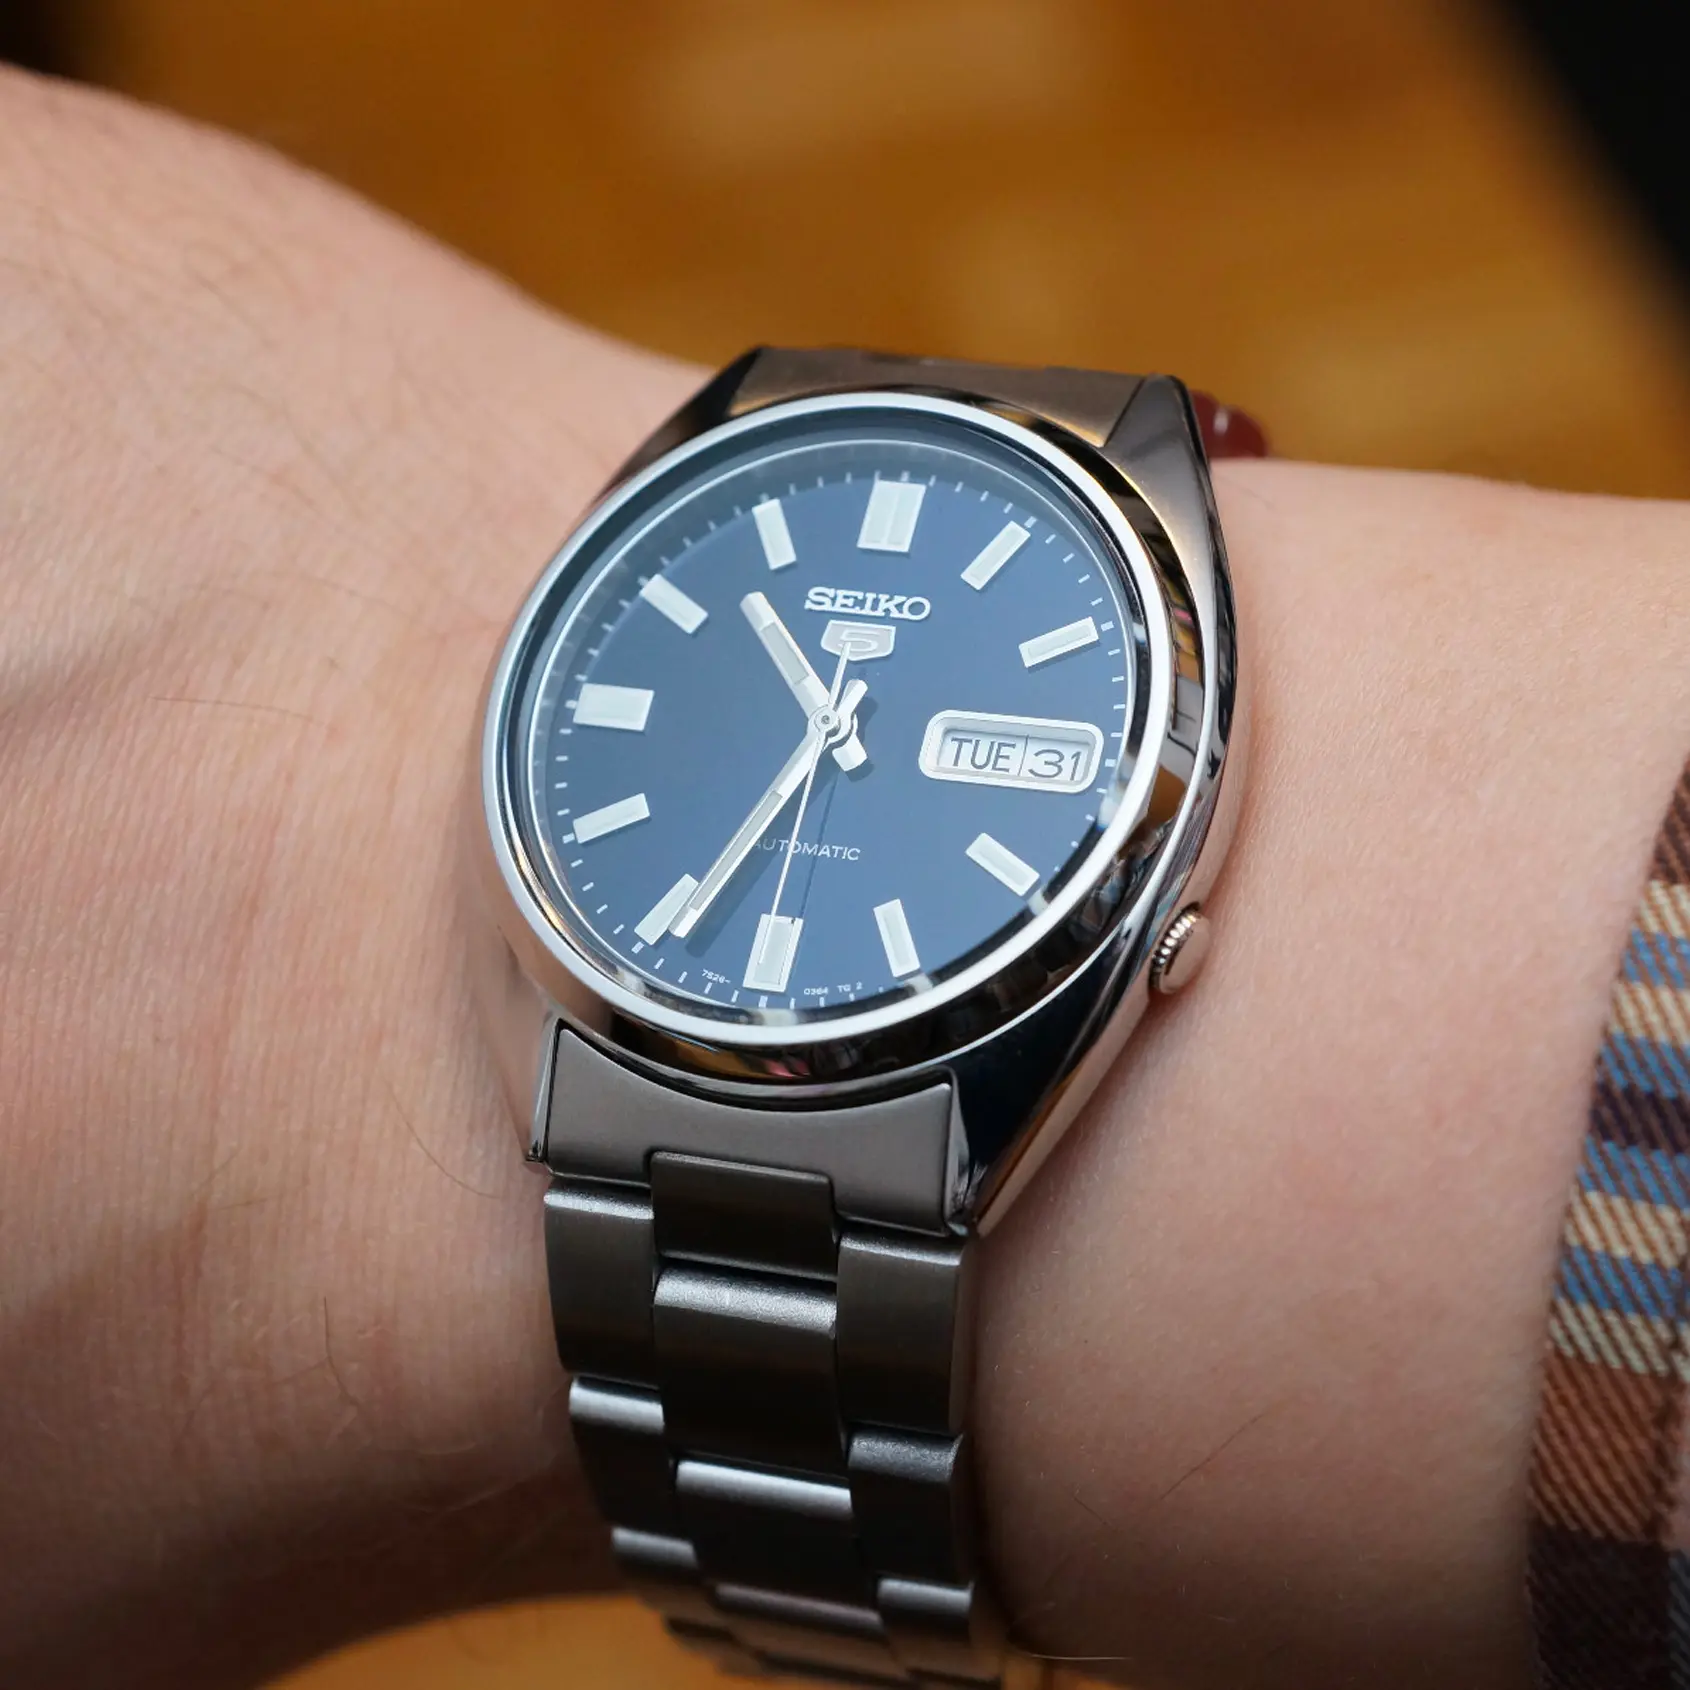 7 Best Seiko Dress Watch for an Everyday Beauty Companion – Gnomon Watches-cokhiquangminh.vn